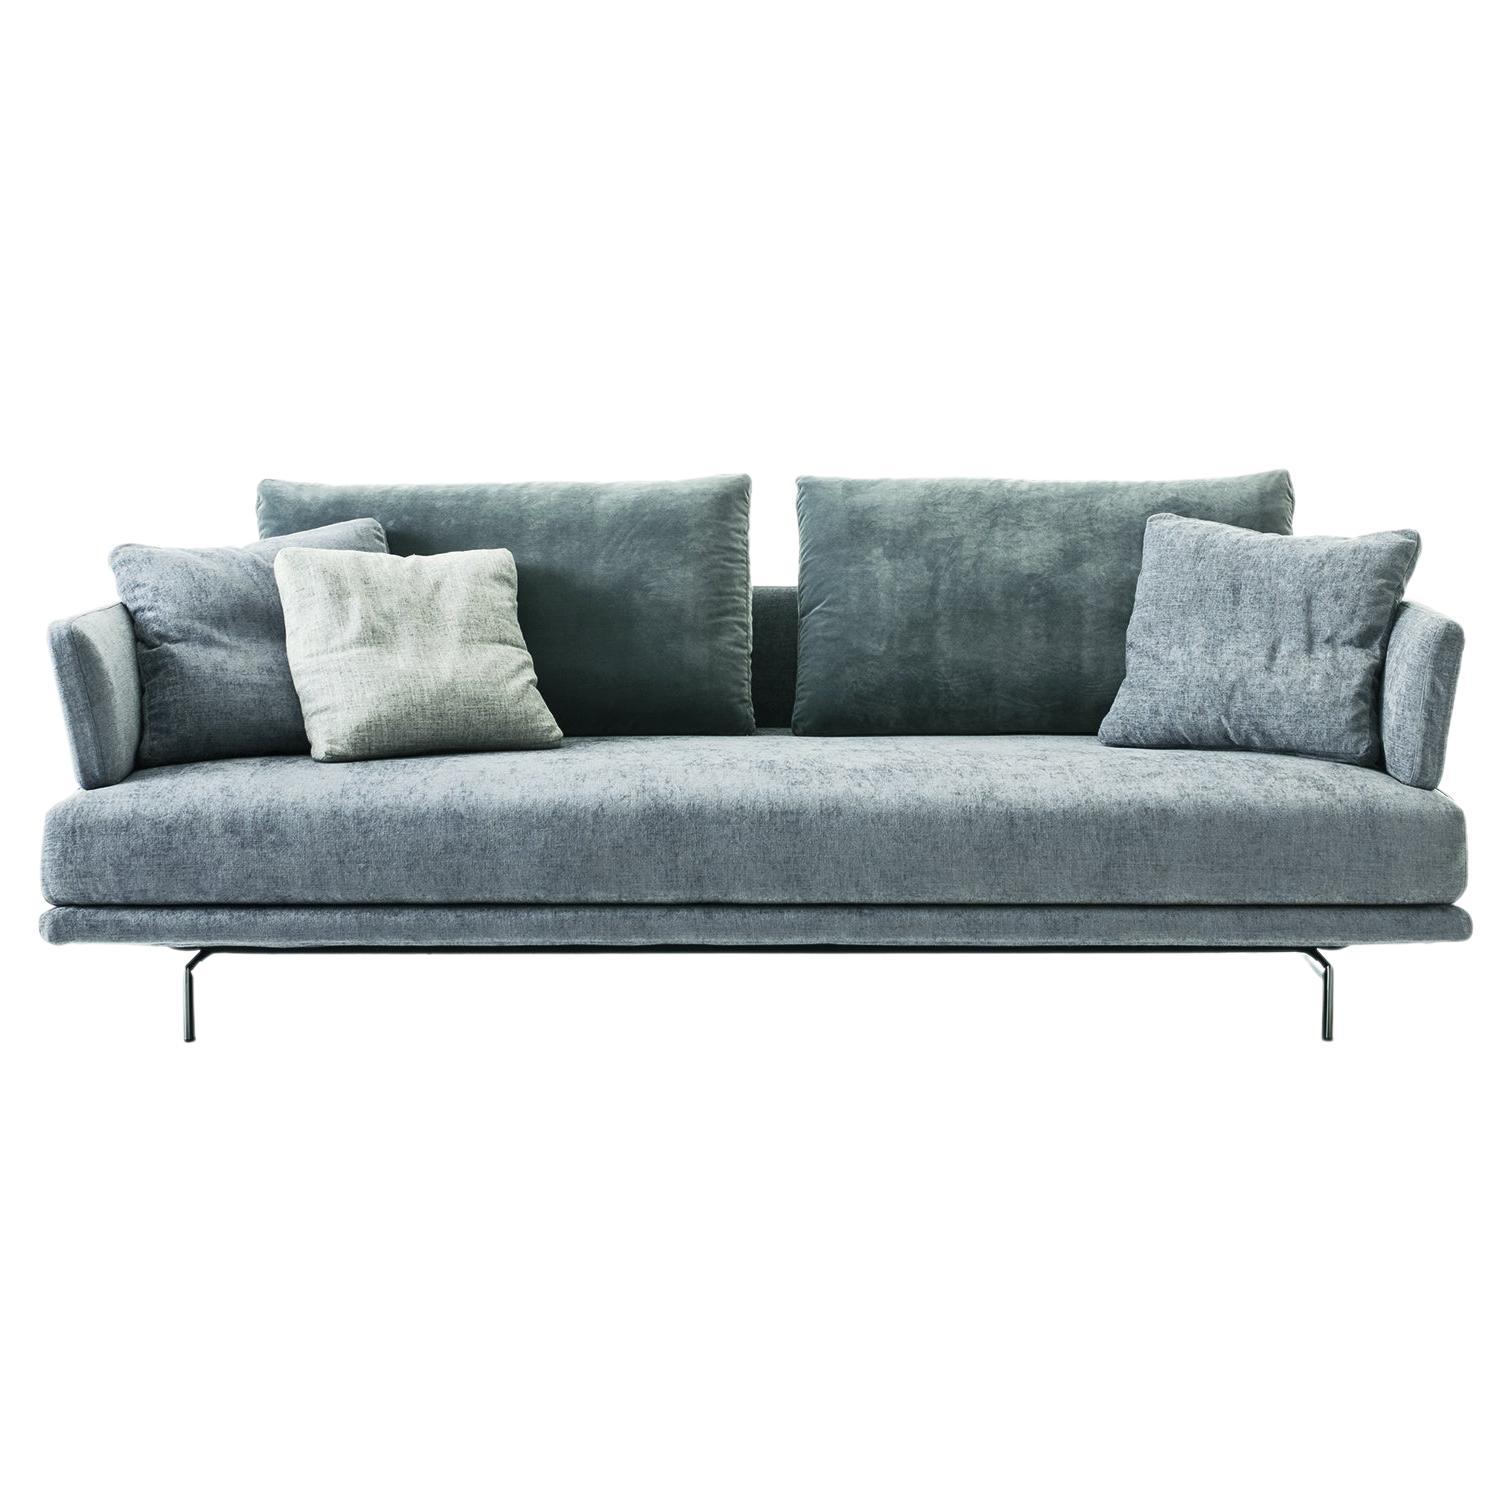 Quinta Strada 2-Seat Small Sofa in Clean Grey Upholstery by Sergio Bicego For Sale